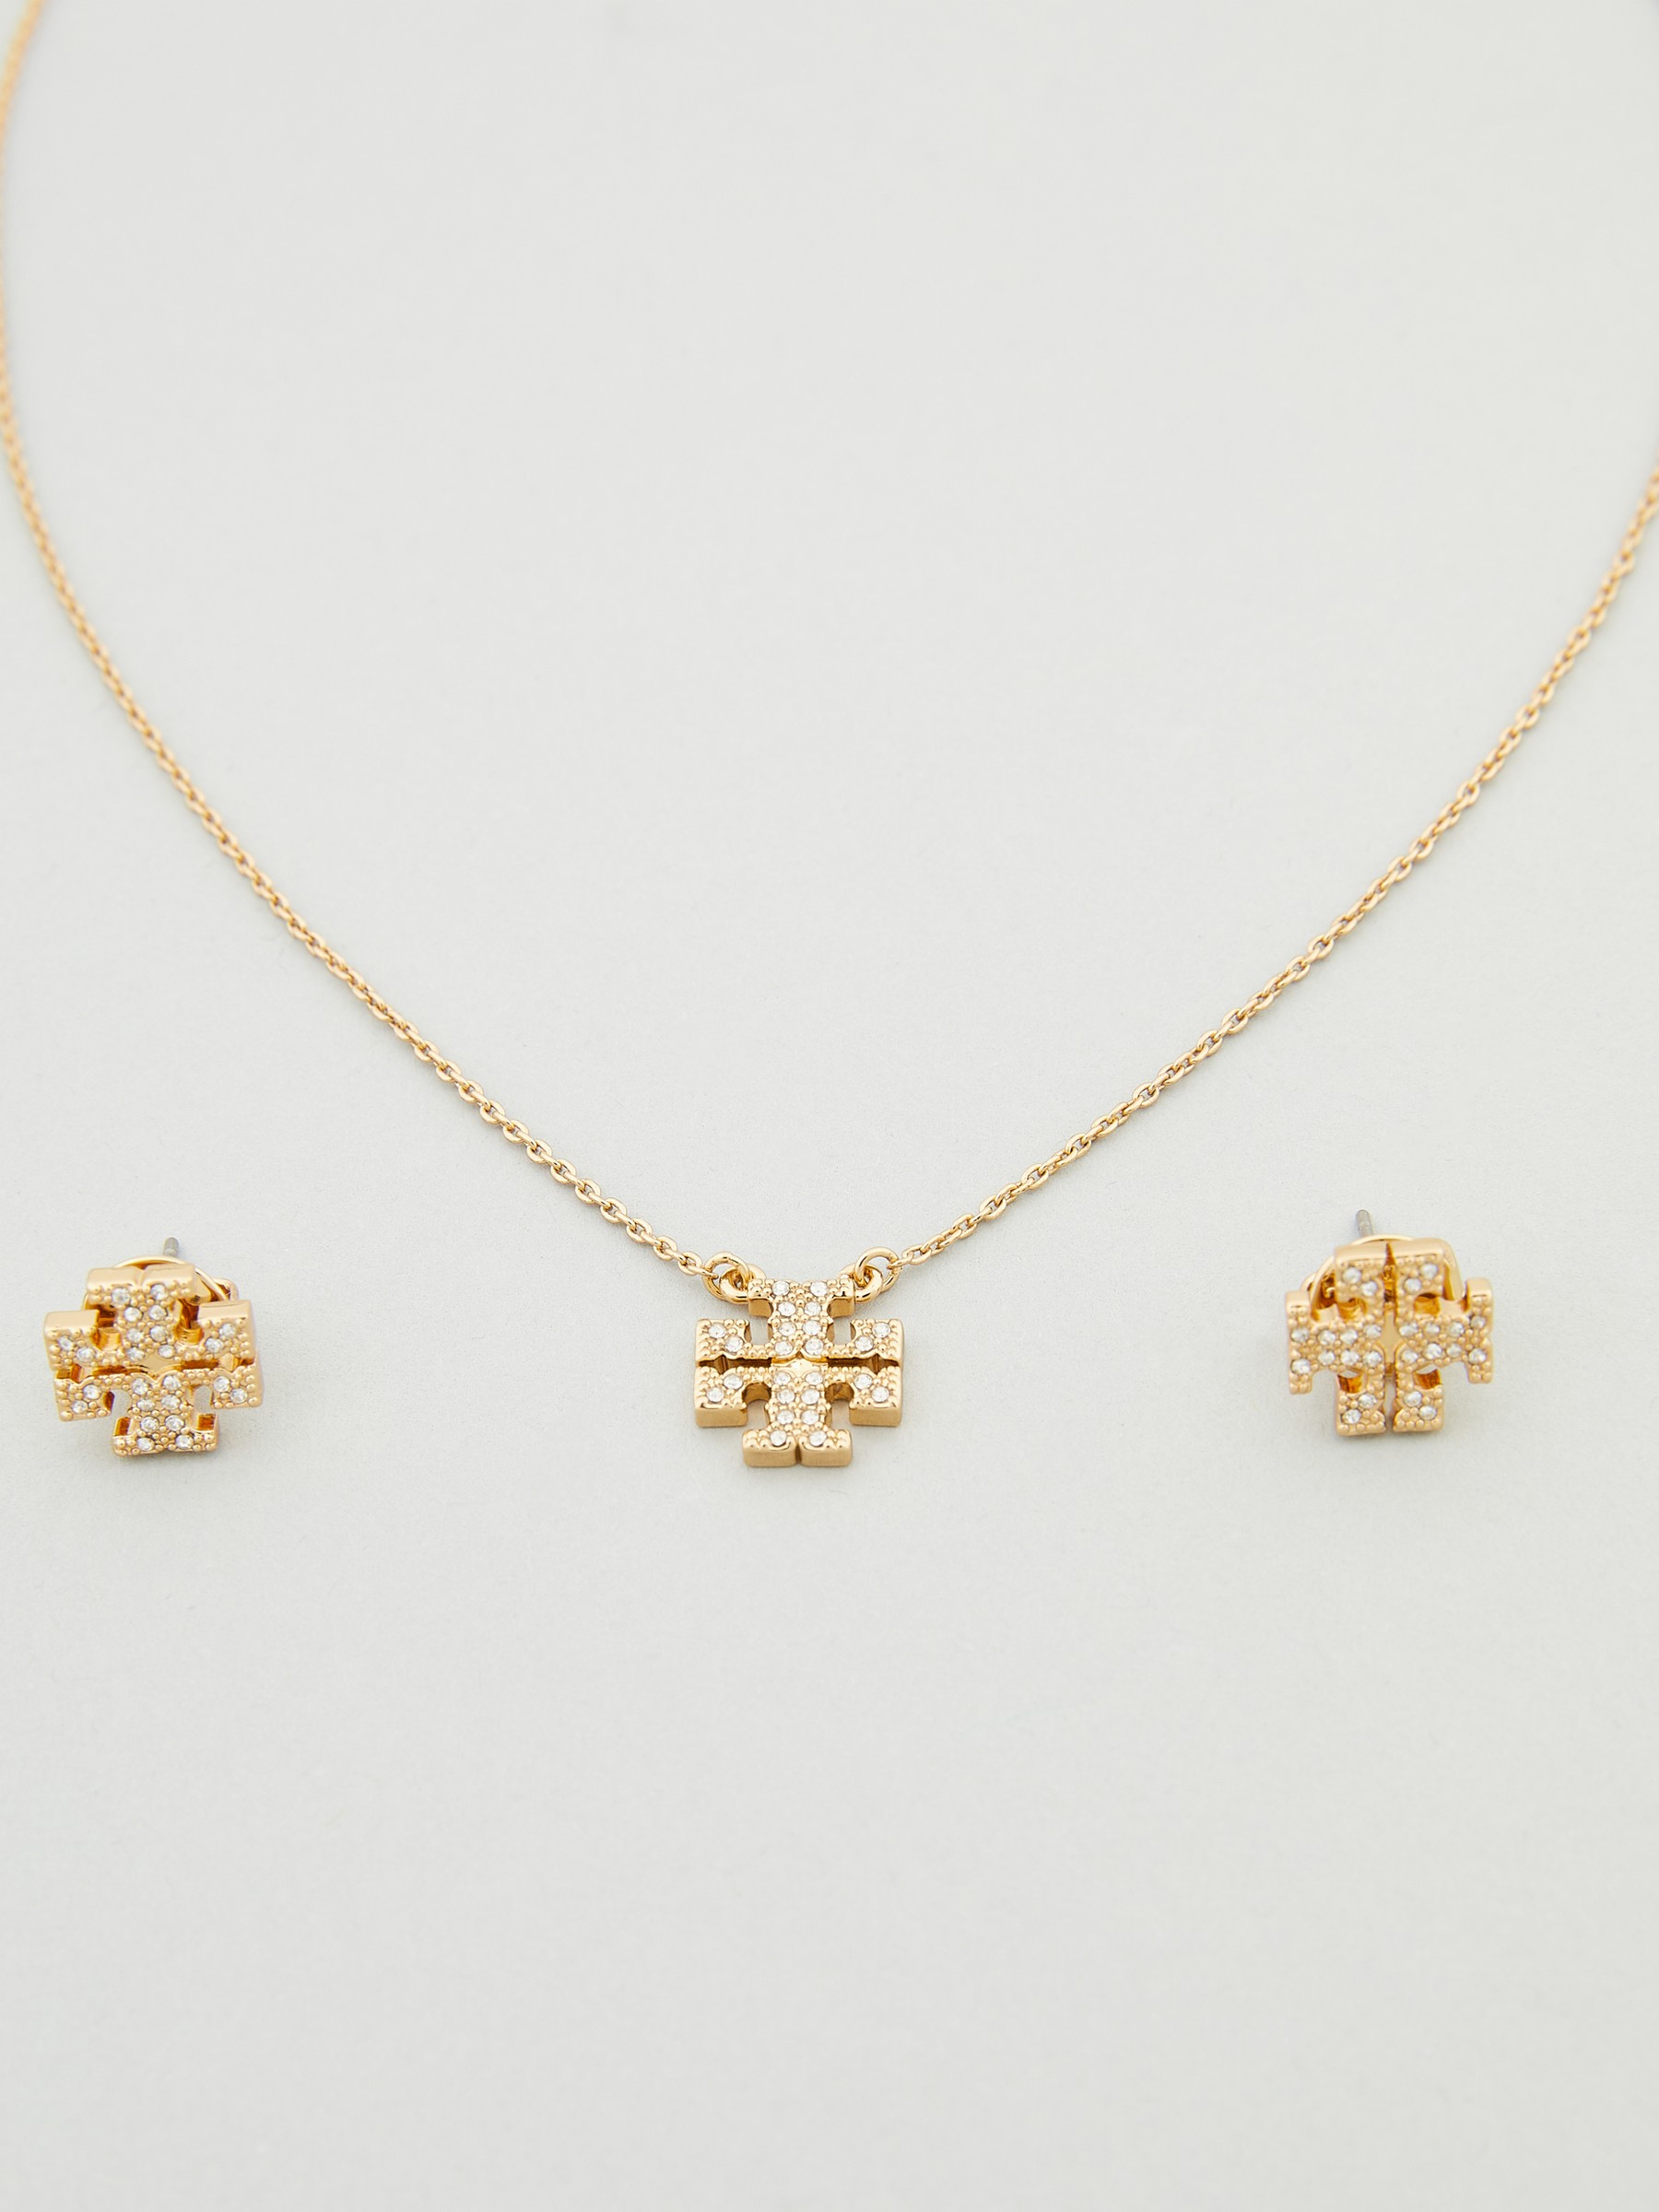 Tory Burch Set of stud earrings and necklace 'Kira' gold | Earrings